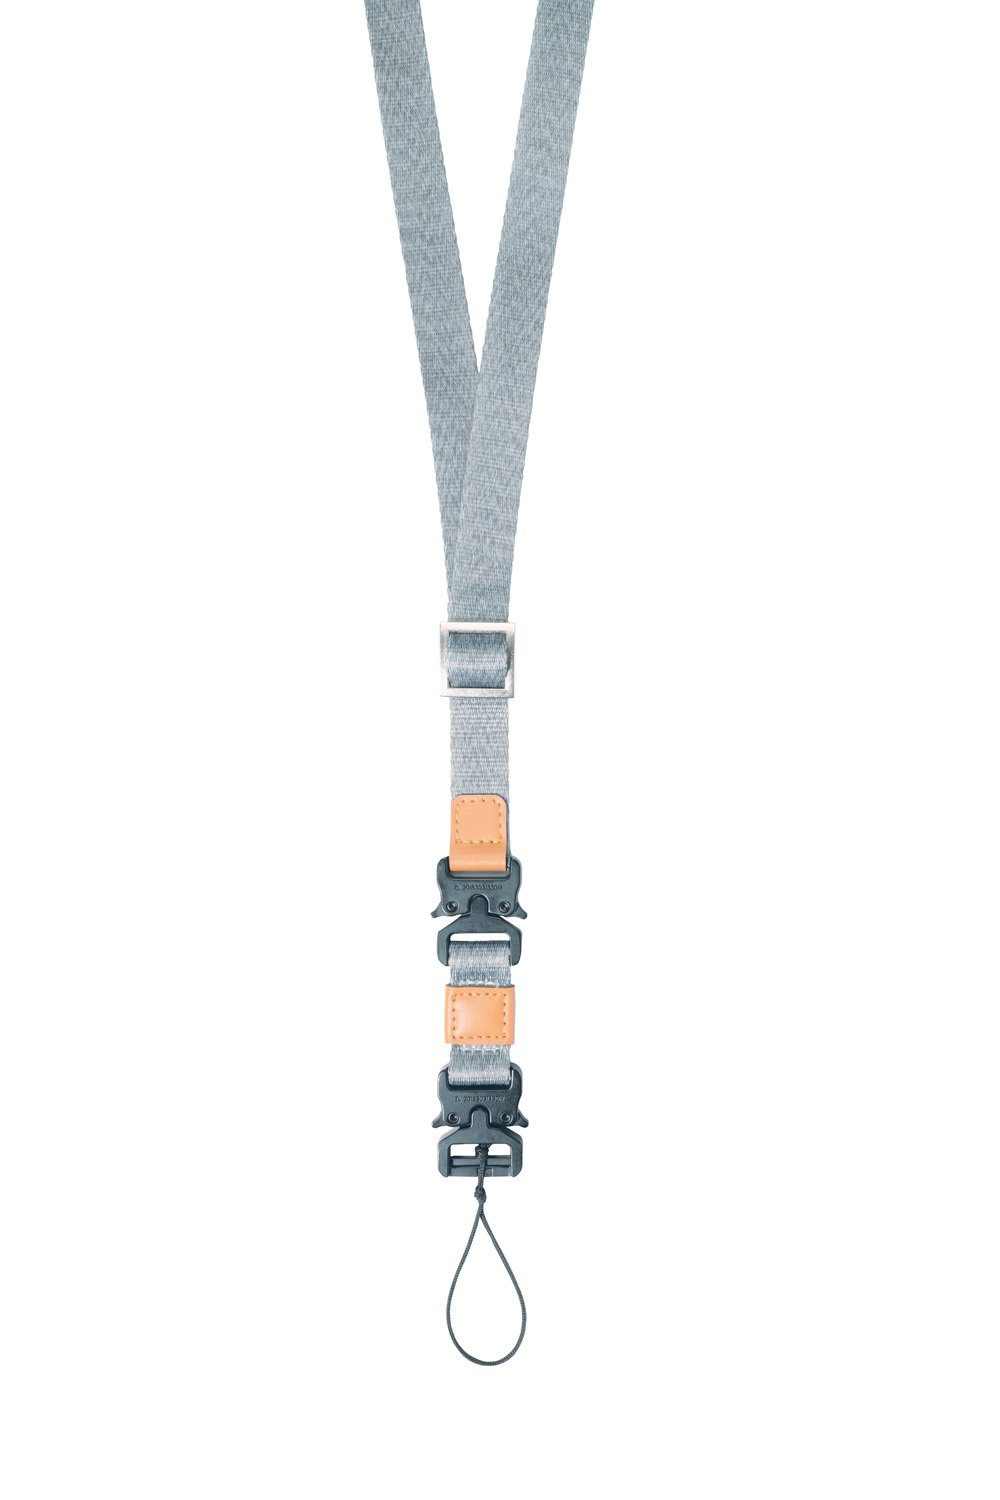 GoView PORTR universal carrying strap Fernglas